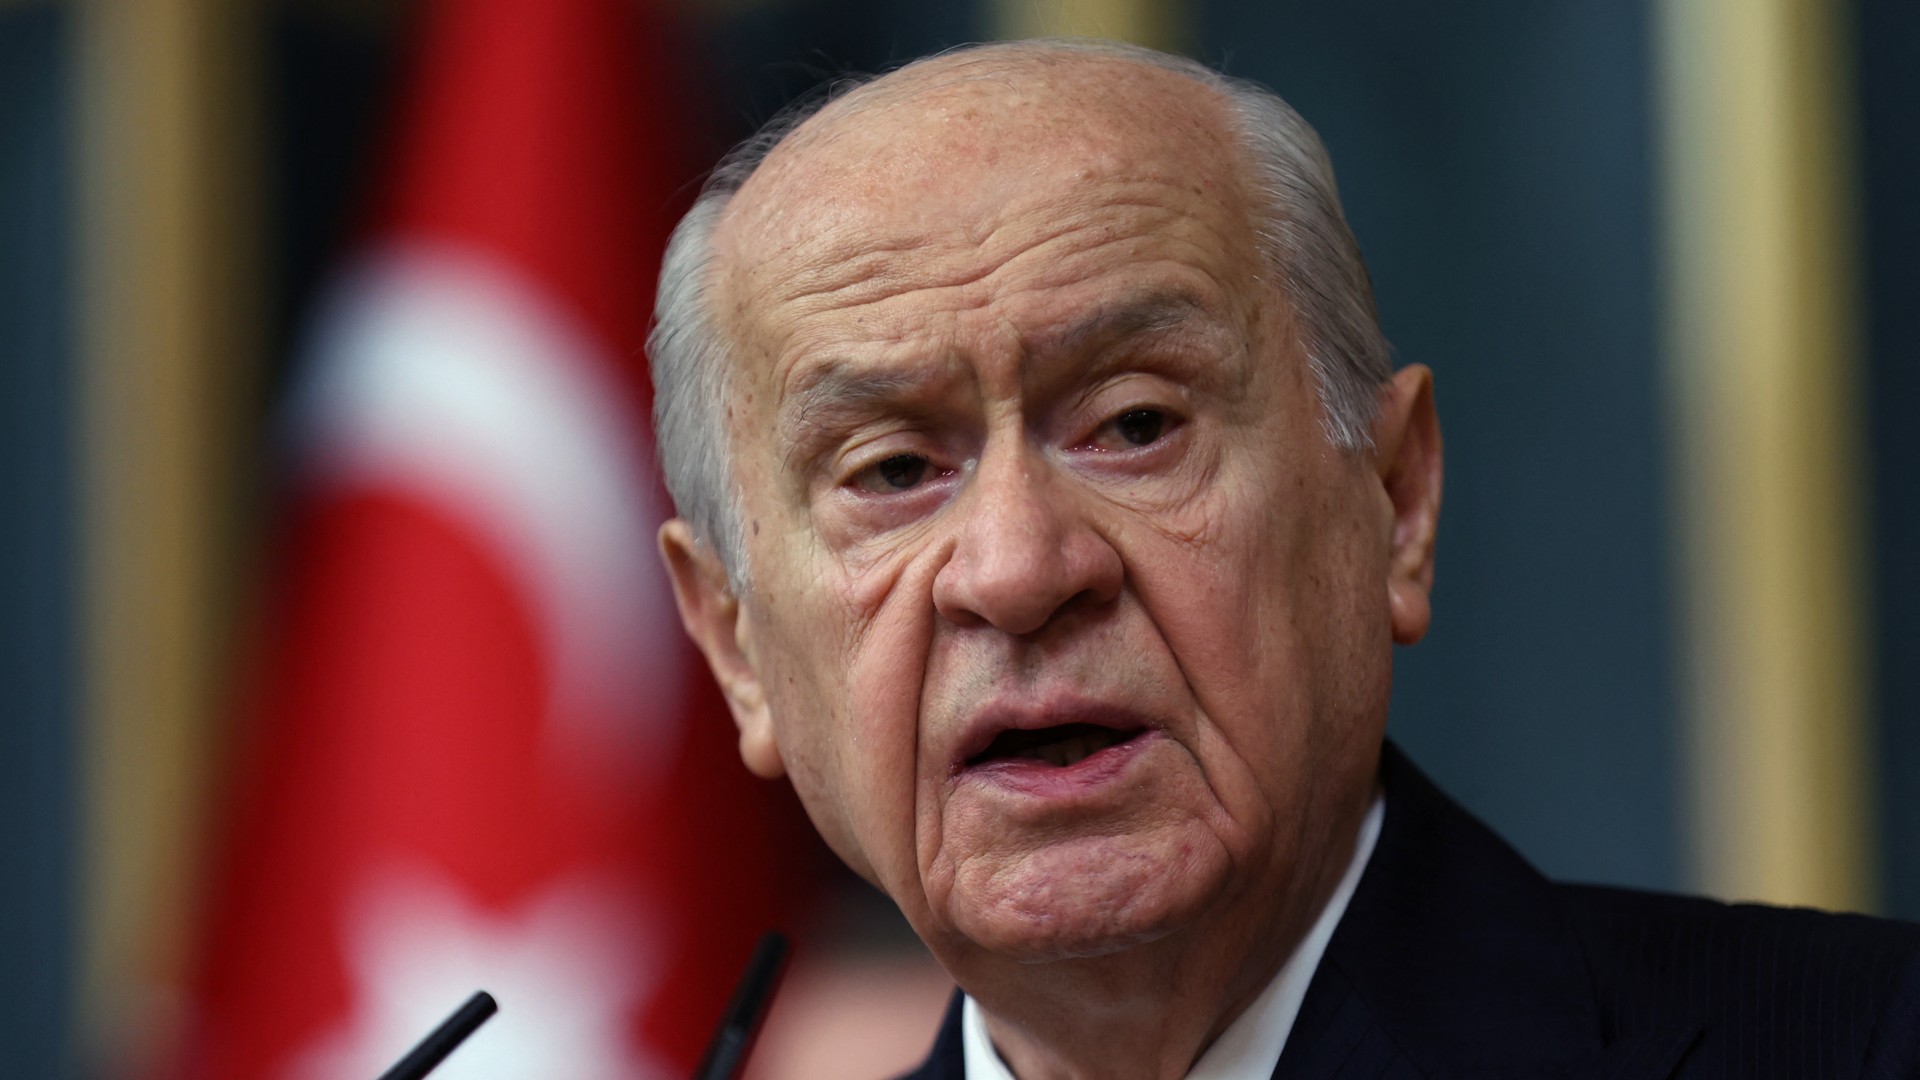 MHP leader Devlet Bahceli has accused the chains of being linked to the Gulen movement (AFP)